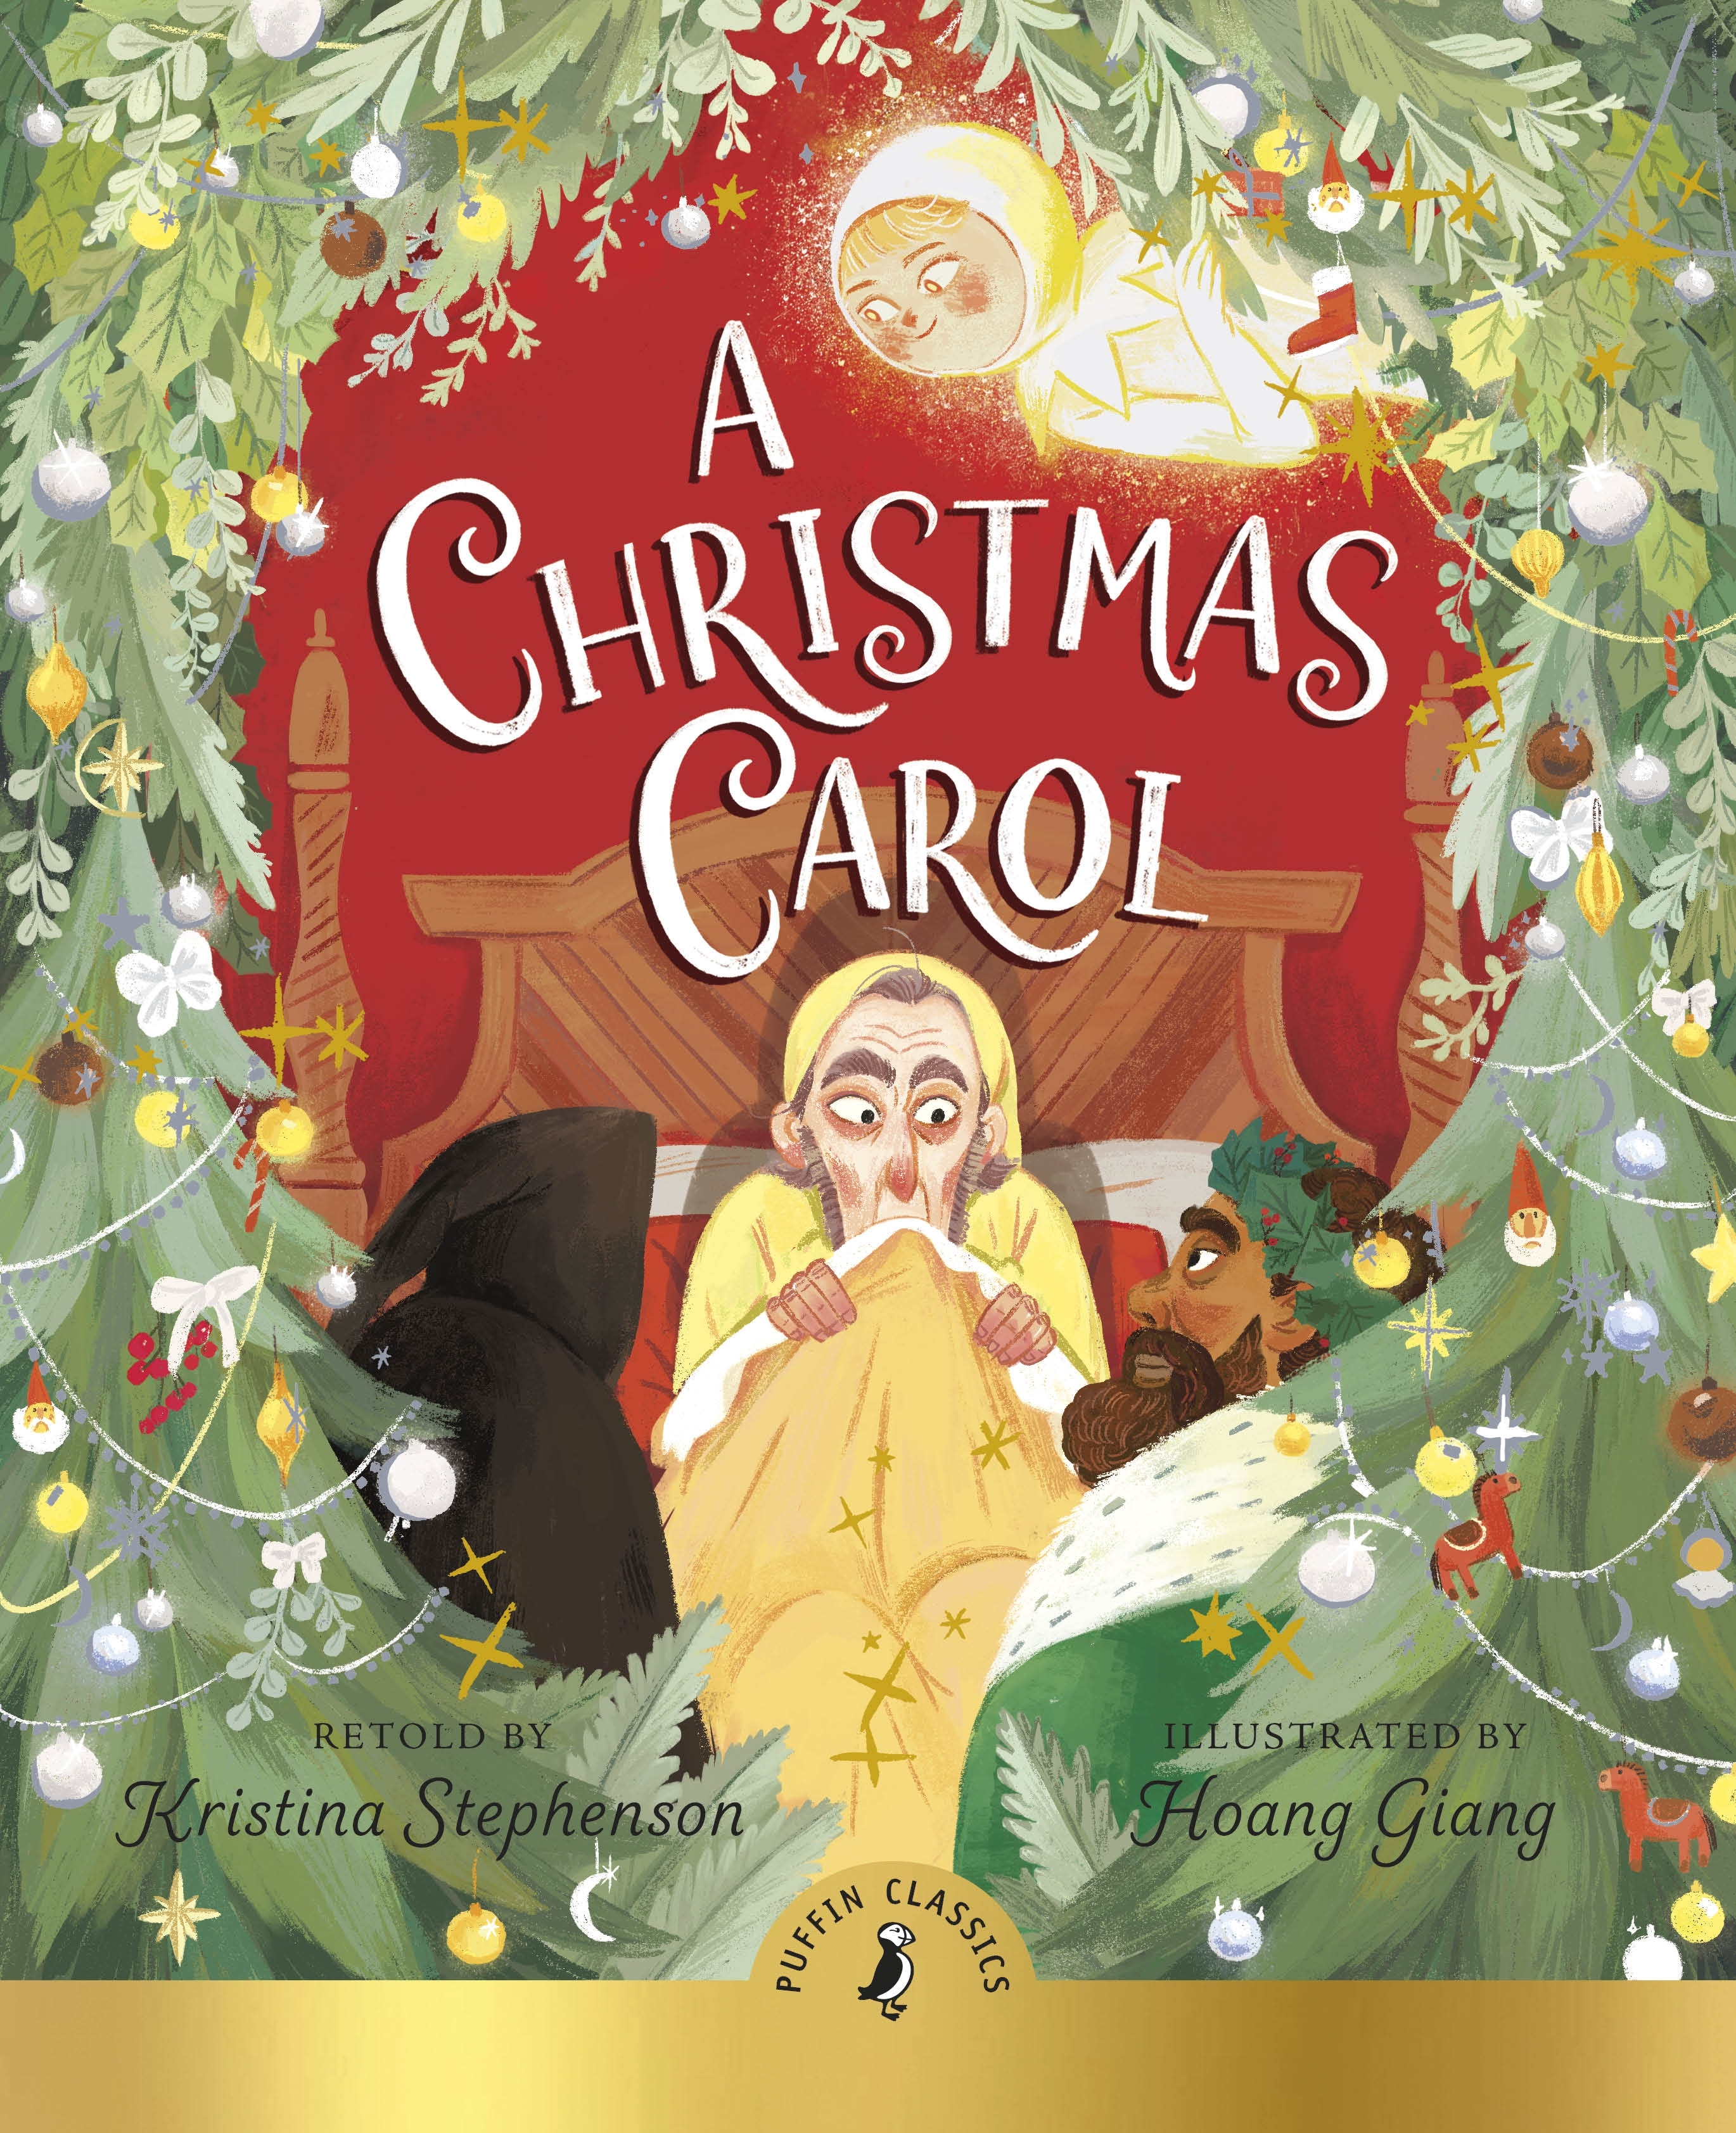 A Christmas Carol VR download the last version for iphone